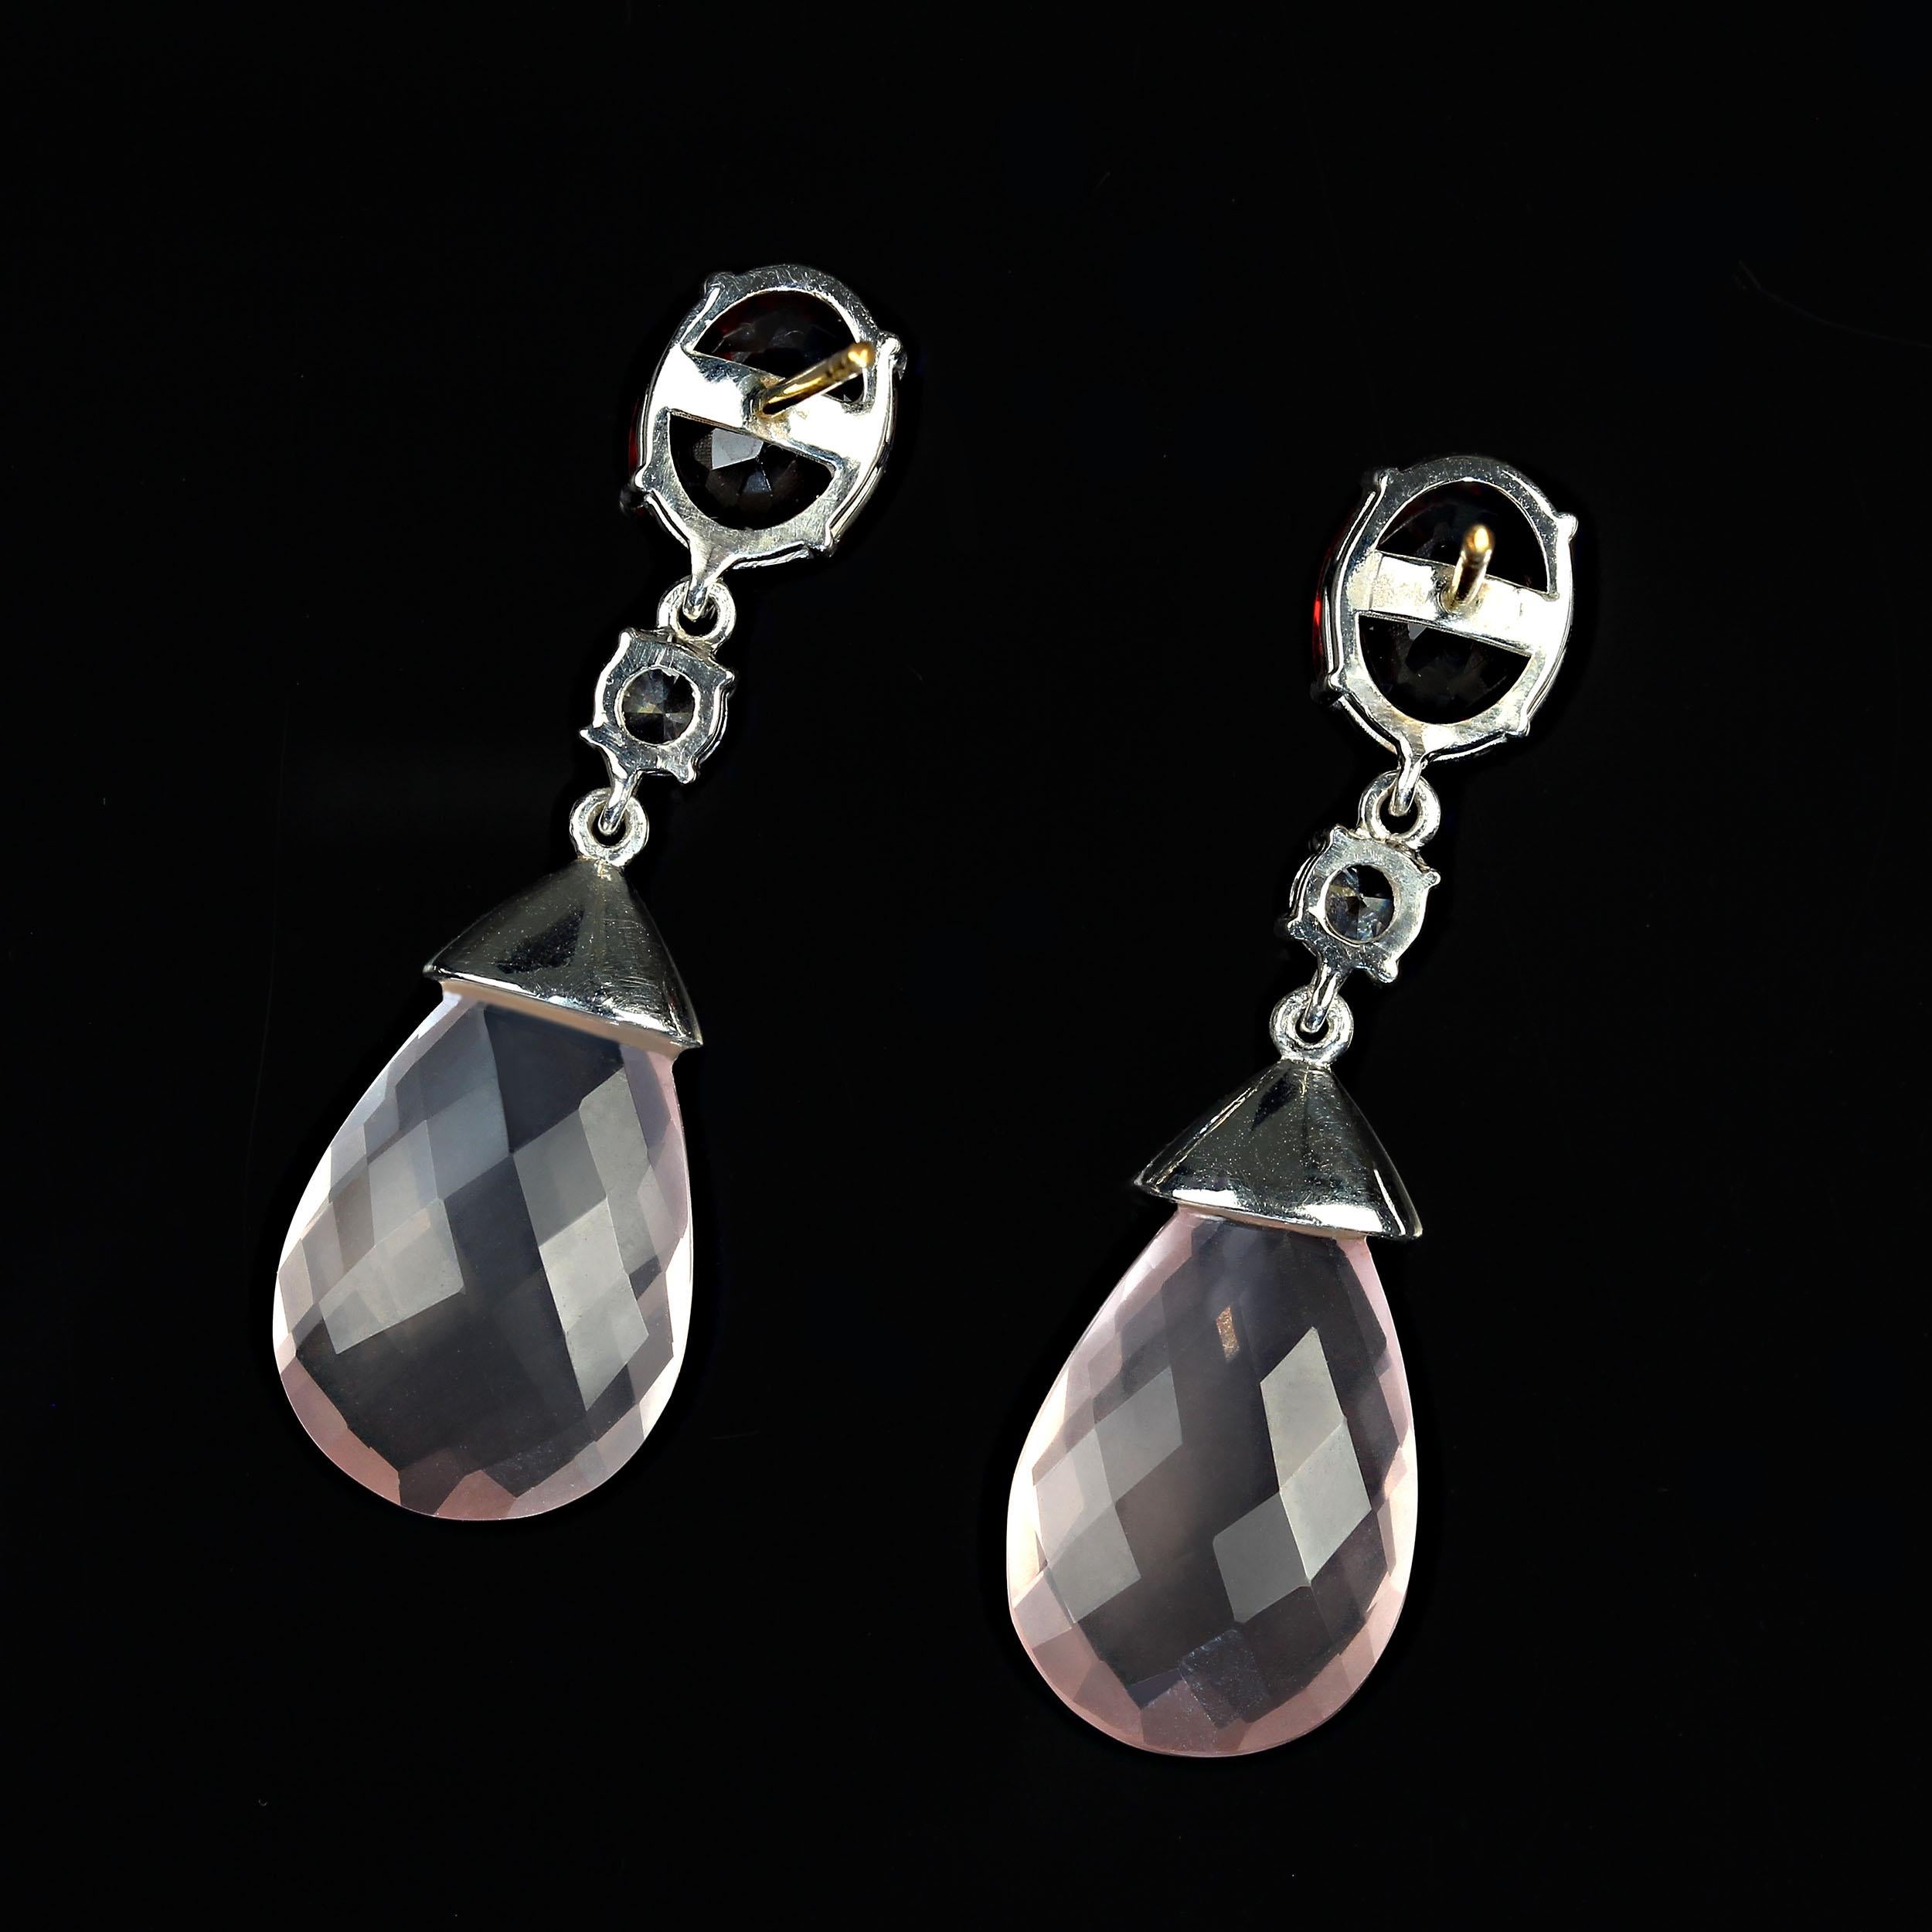 AJD Romantic Rose Quartz and Garnet in Sterling Silver Earrings In New Condition For Sale In Raleigh, NC